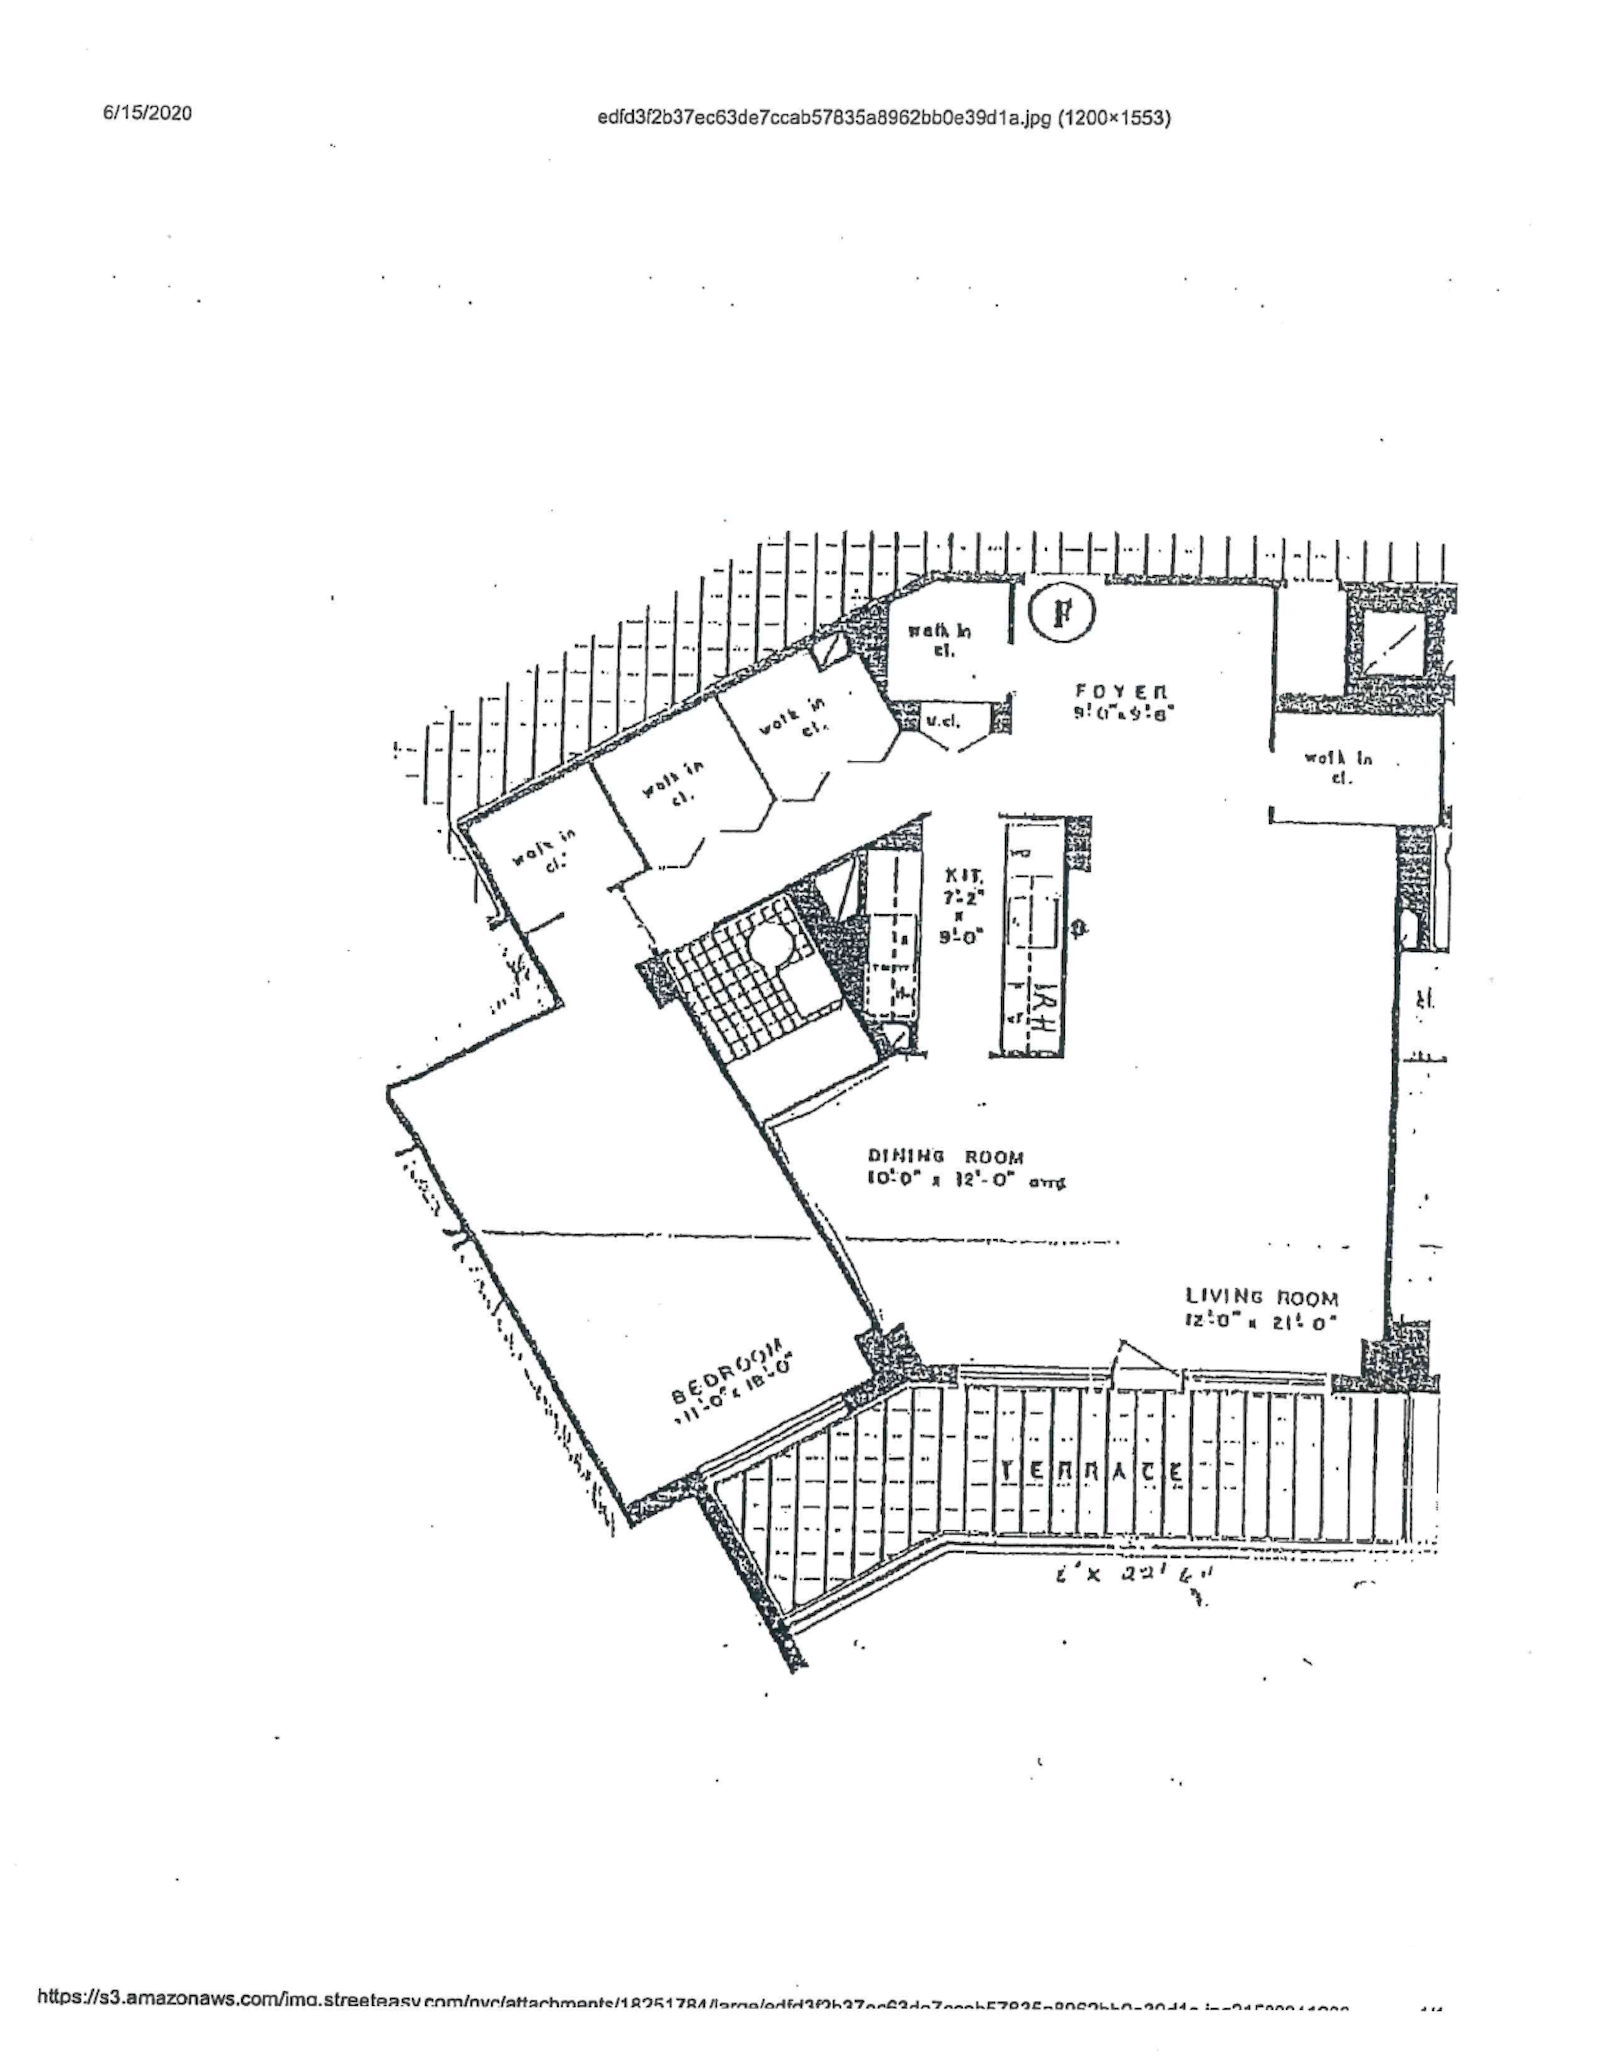 Floorplan for 3777 Independence Avenue, 3F